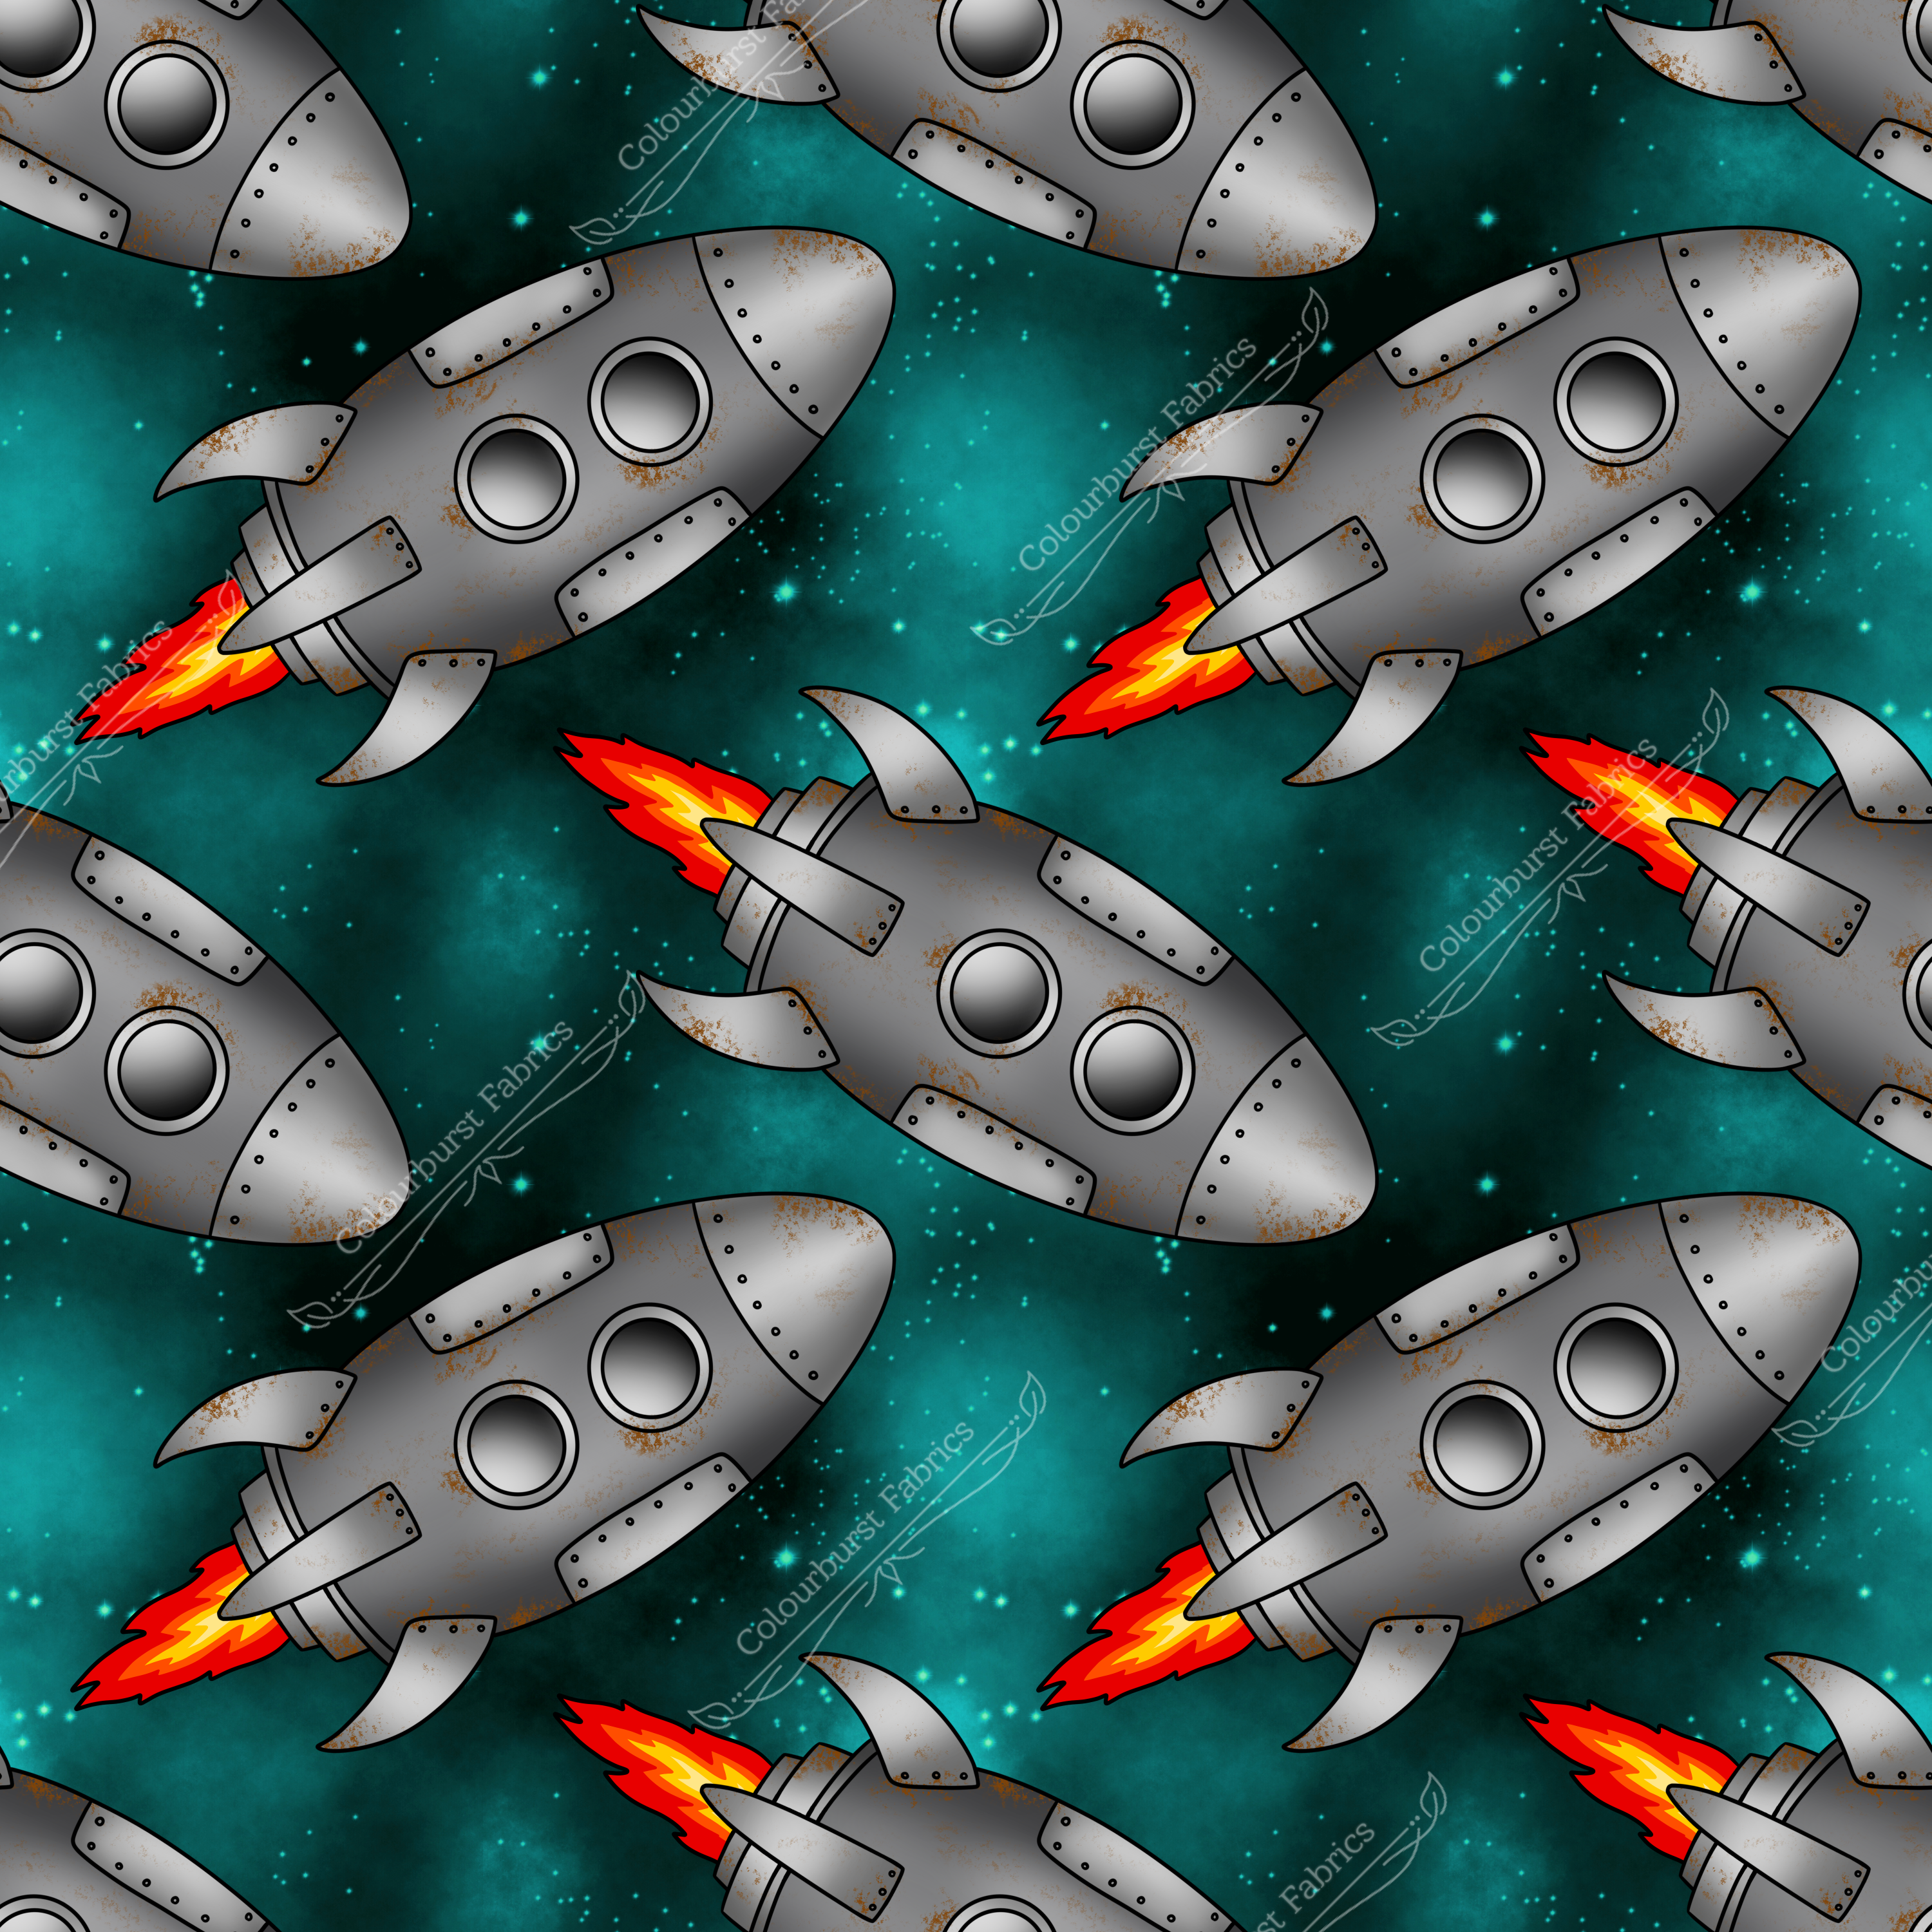 Grey metal rockets with rusted patches and fire flames out the base of the rocket. A galaxy turquoise/teal coloured background. Exclusive design available for pre-order on our 23 bases.